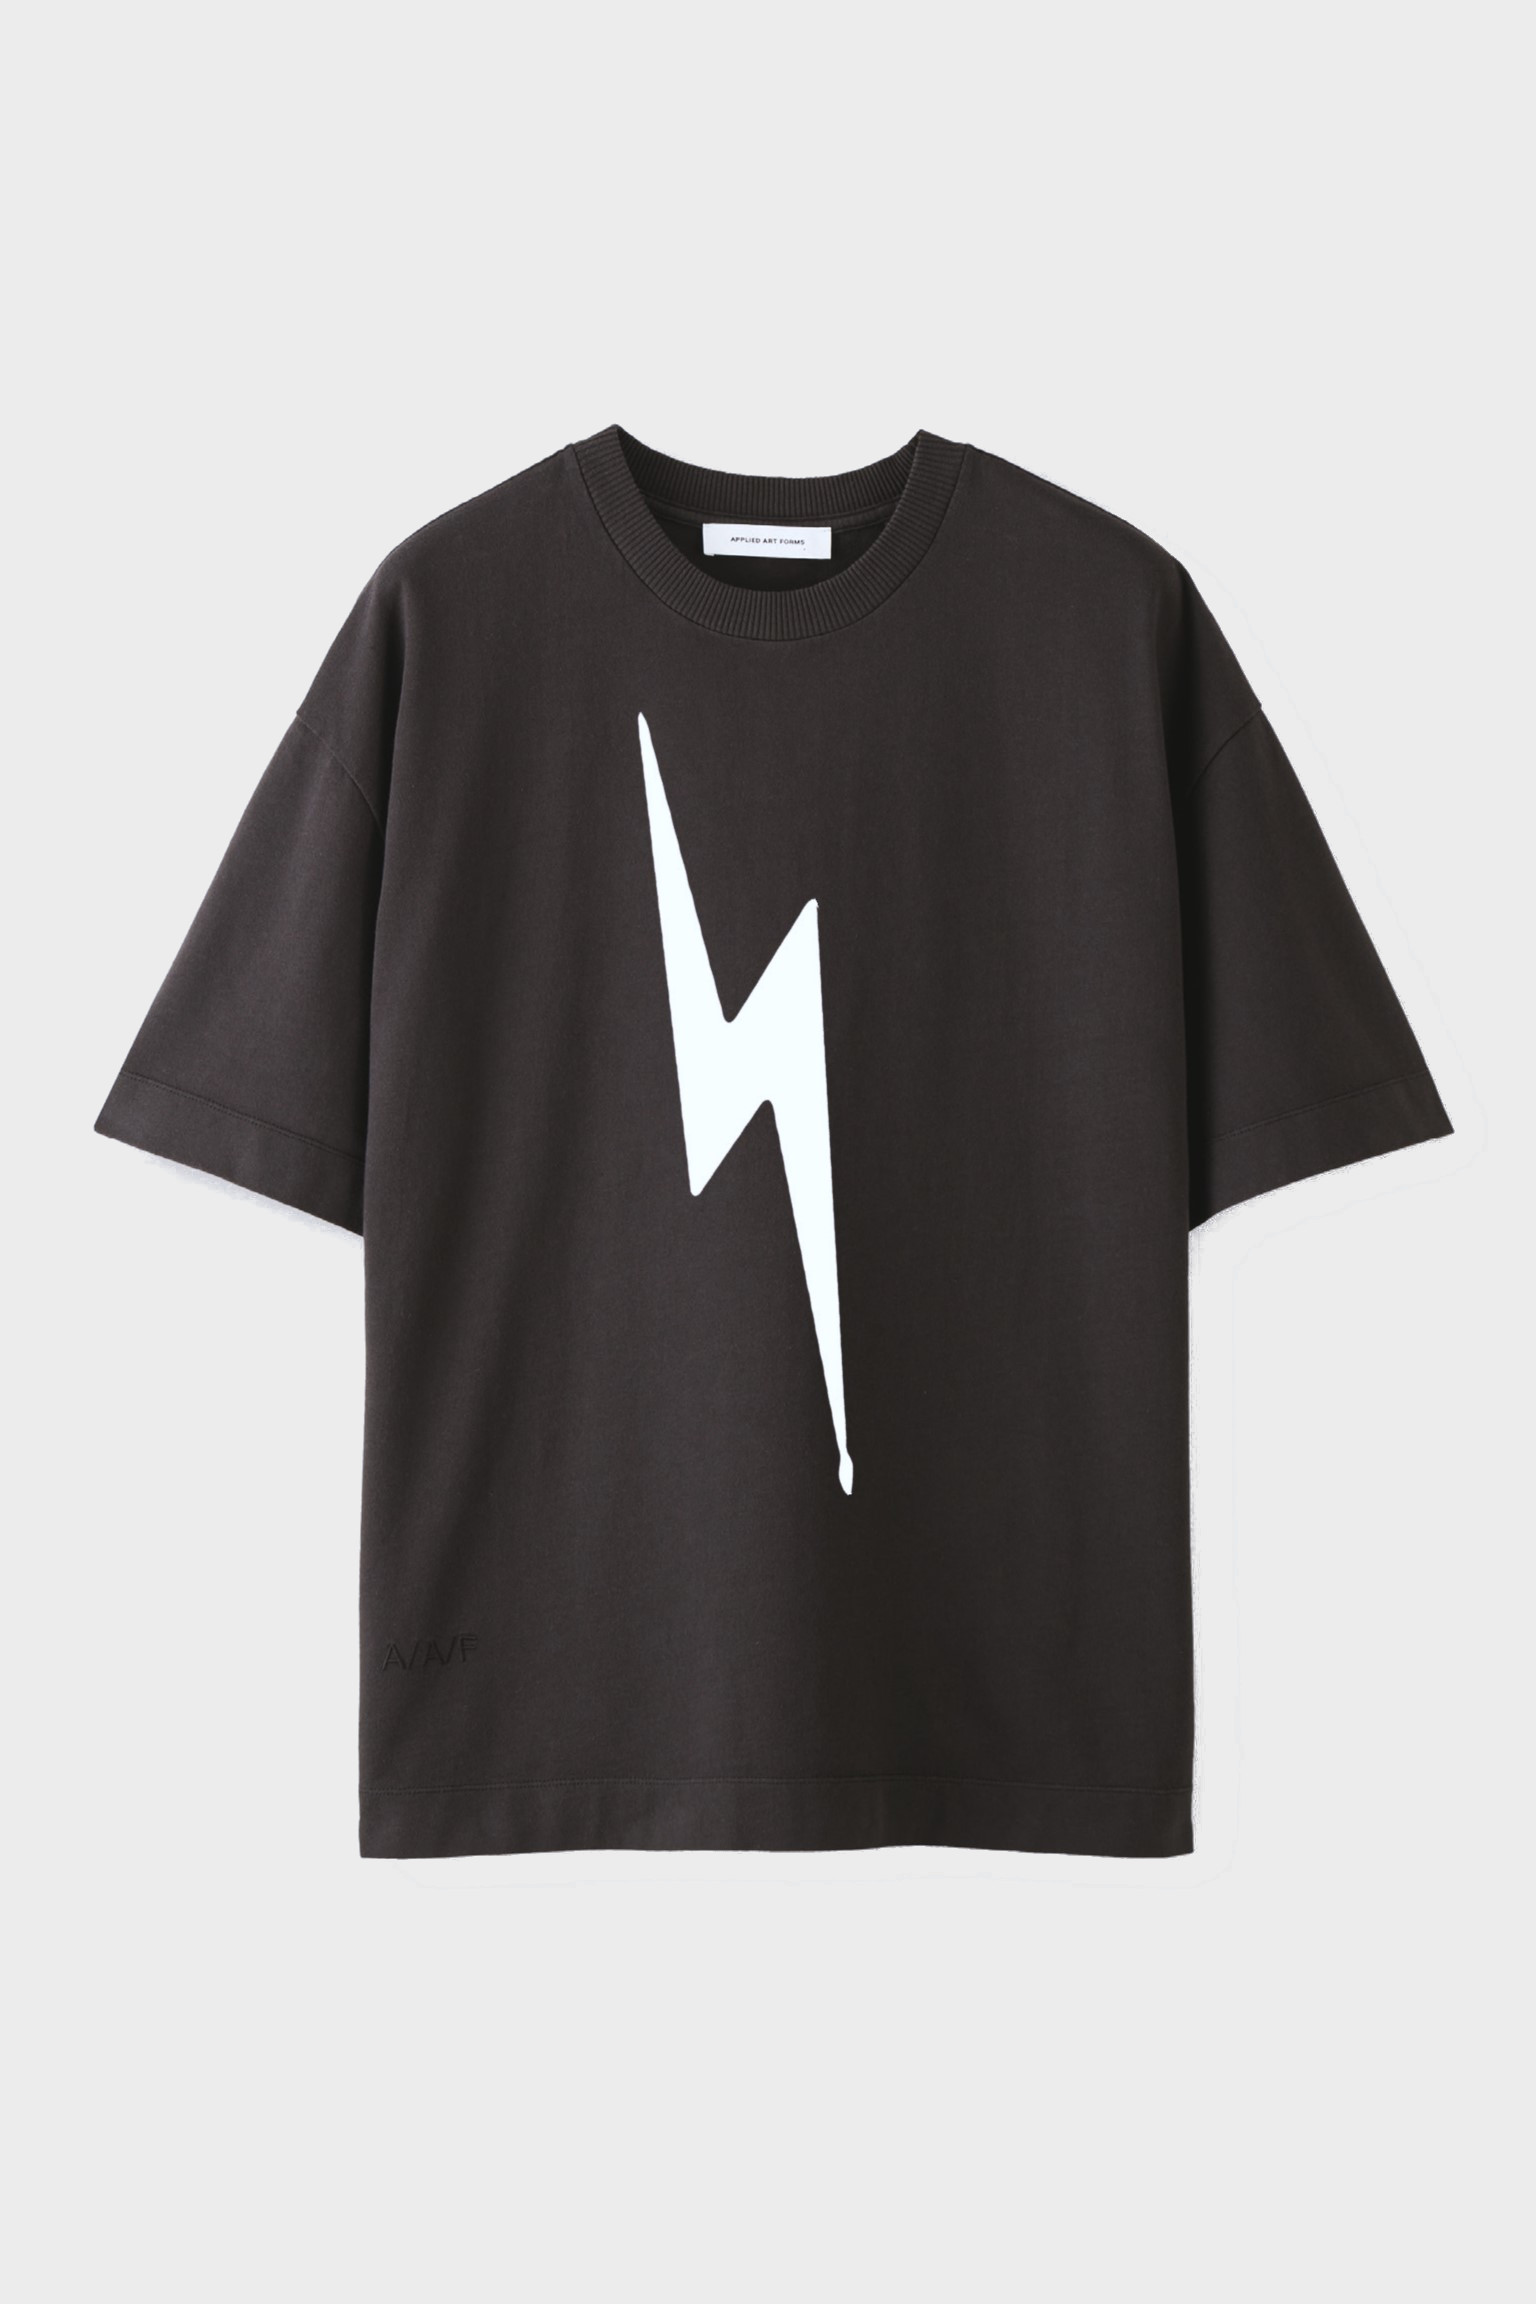 APPLIED ART FORMS Lightning Oversize T-Shirt in Charcoal